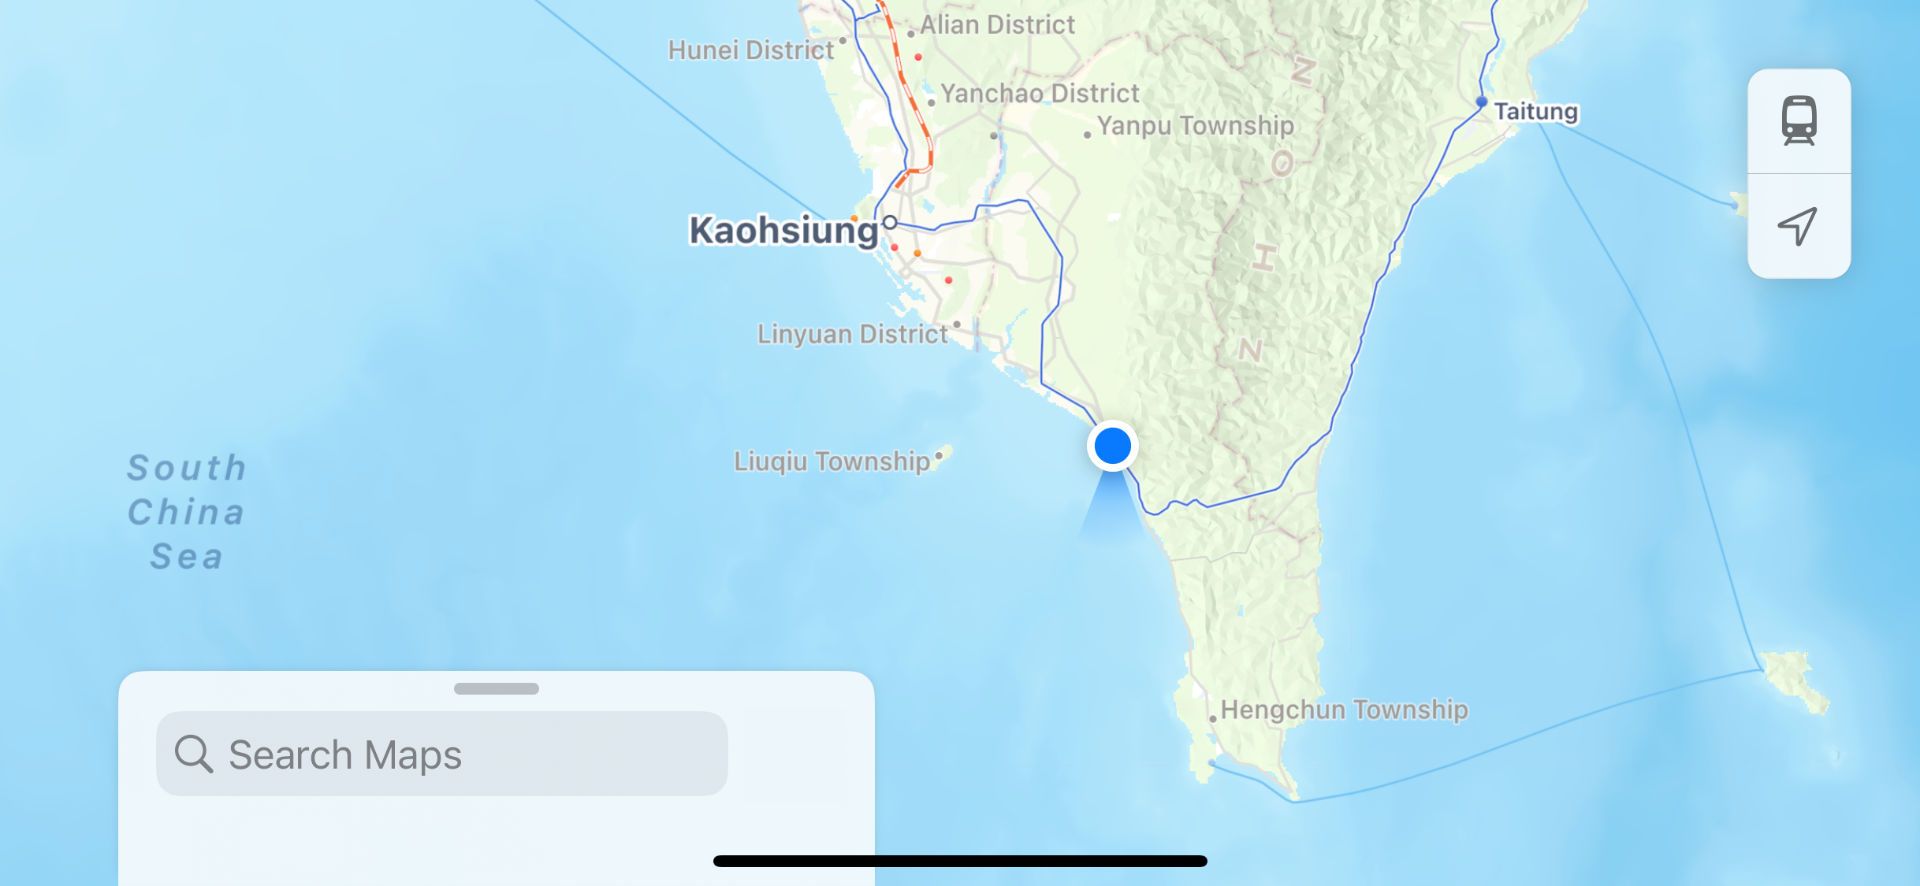 Screenshot of Apple Maps, showing the railway line from Kaohsiung to Taitung hooking around the lower part of Taiwan. A blue marker shows this screenshot was taken near the southern-most point on the line, around 40% of the way from Kaohsiung to Taitung.